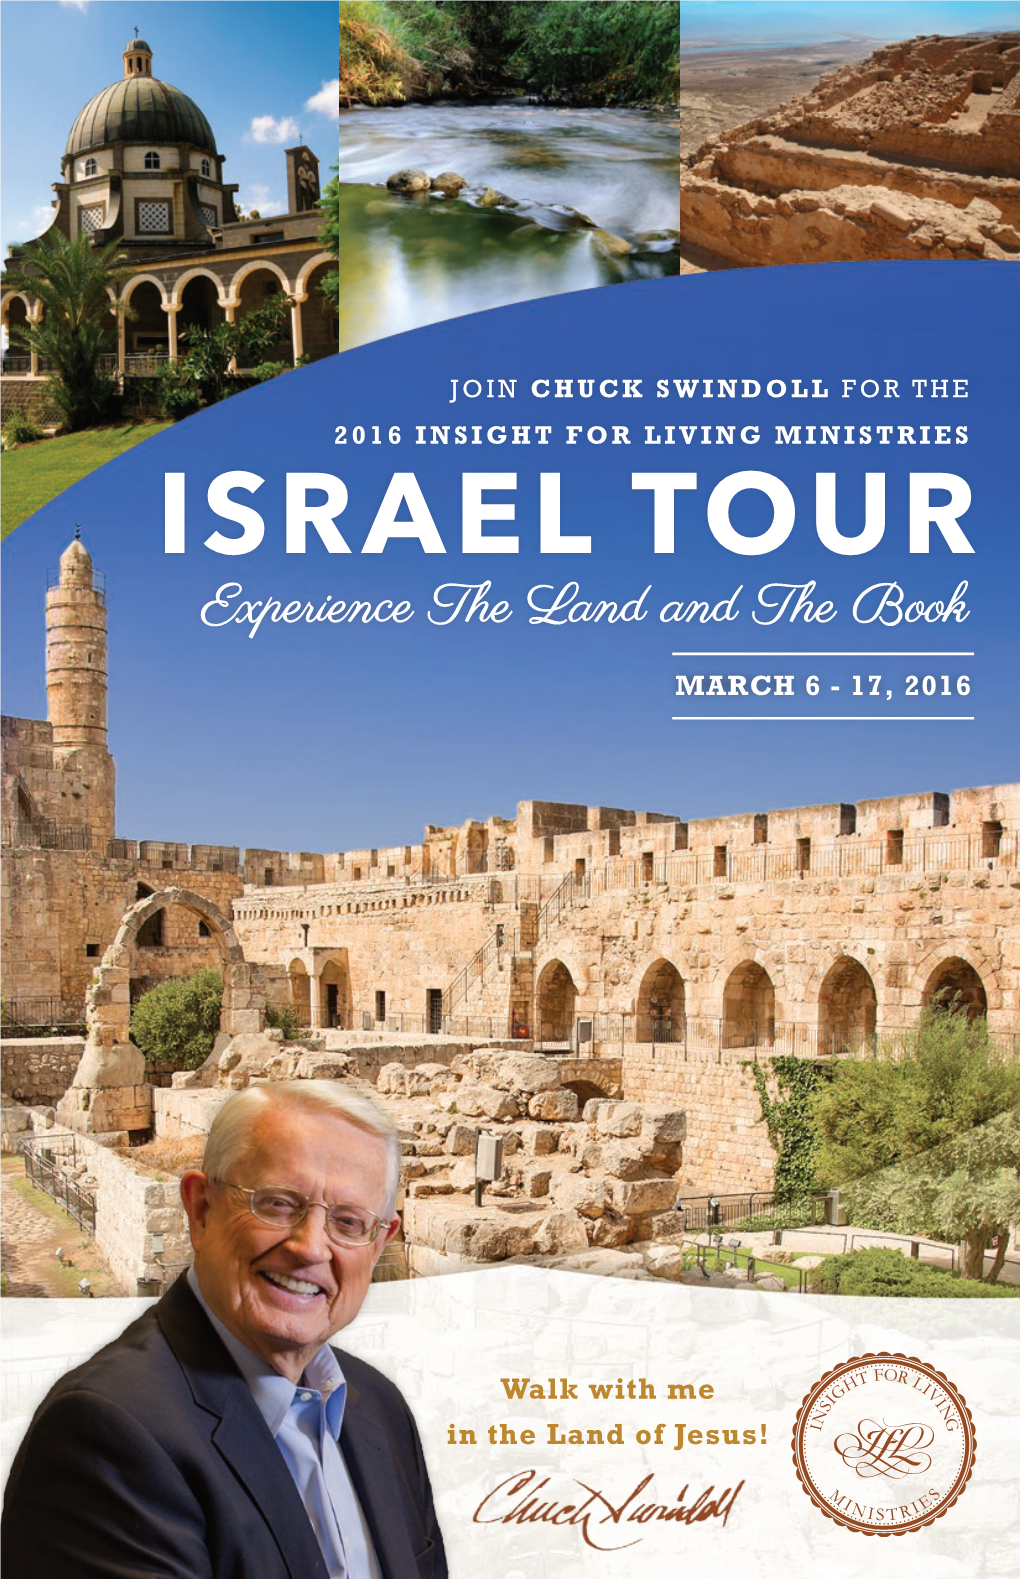 Experience the Land and the Book with Chuck Swindoll and Insight For